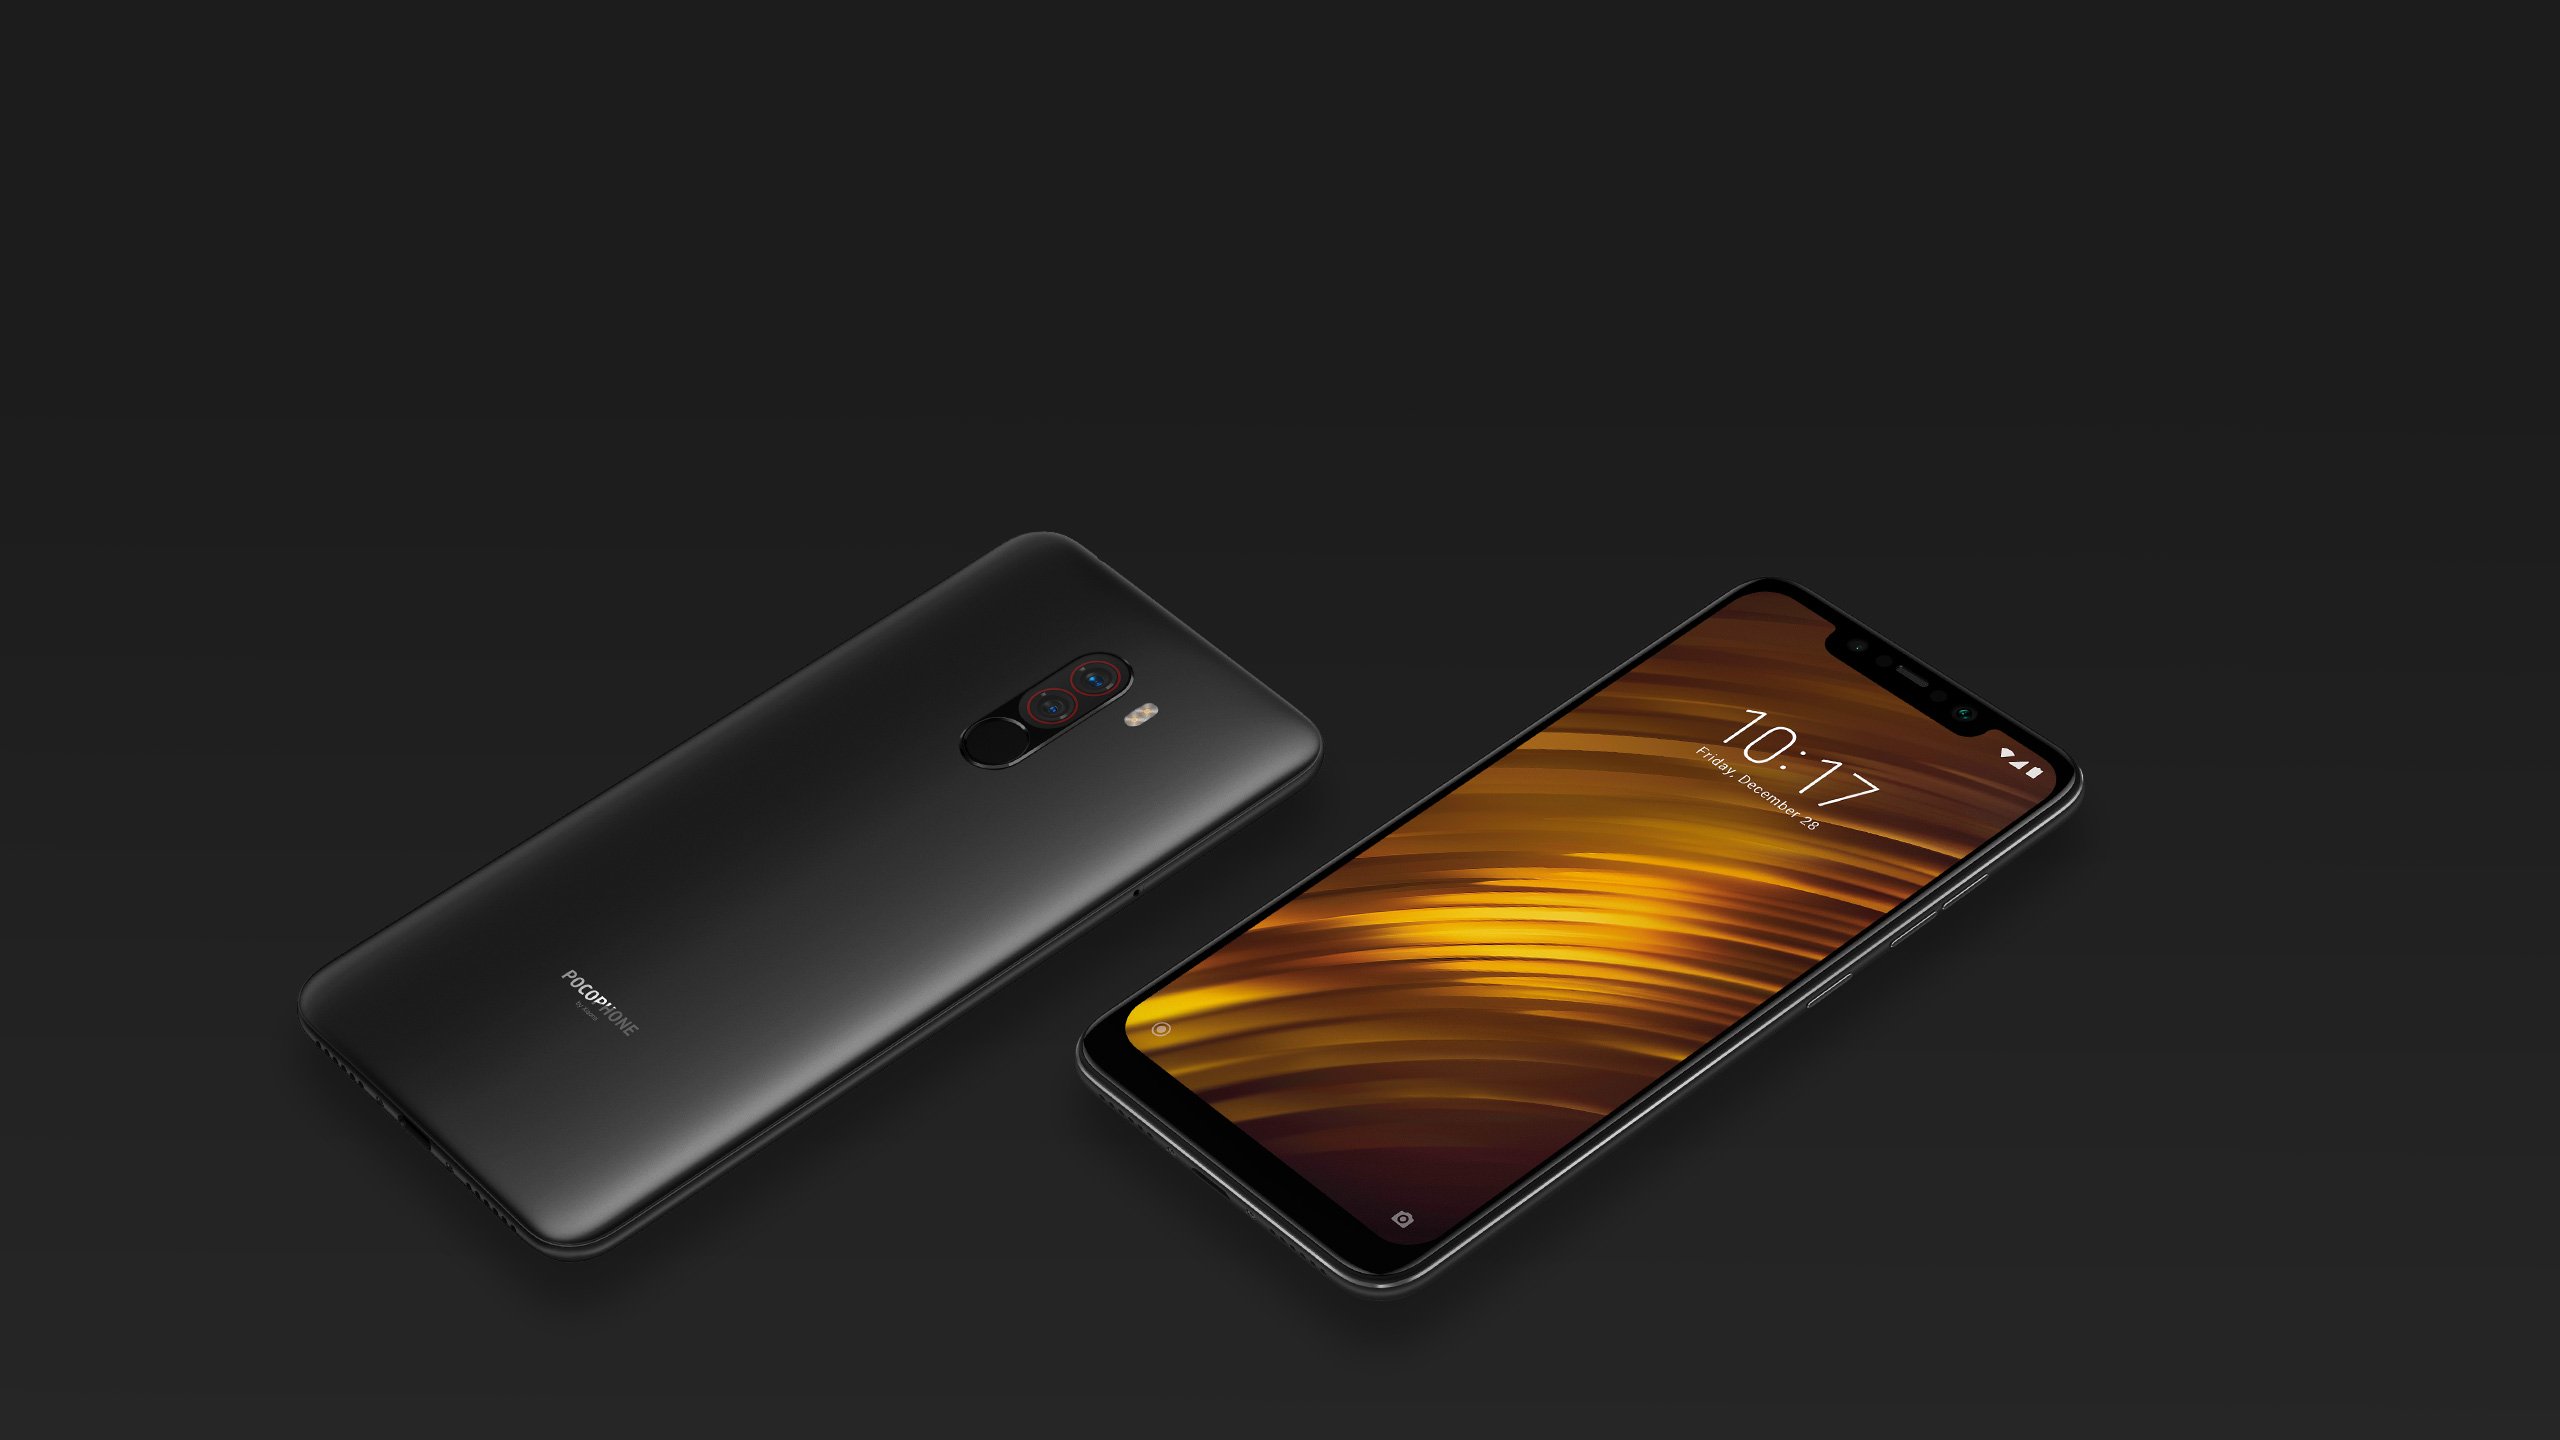 [Promo] The Xiaomi Pocophone F1 at 279 € (delivered in 5 days)